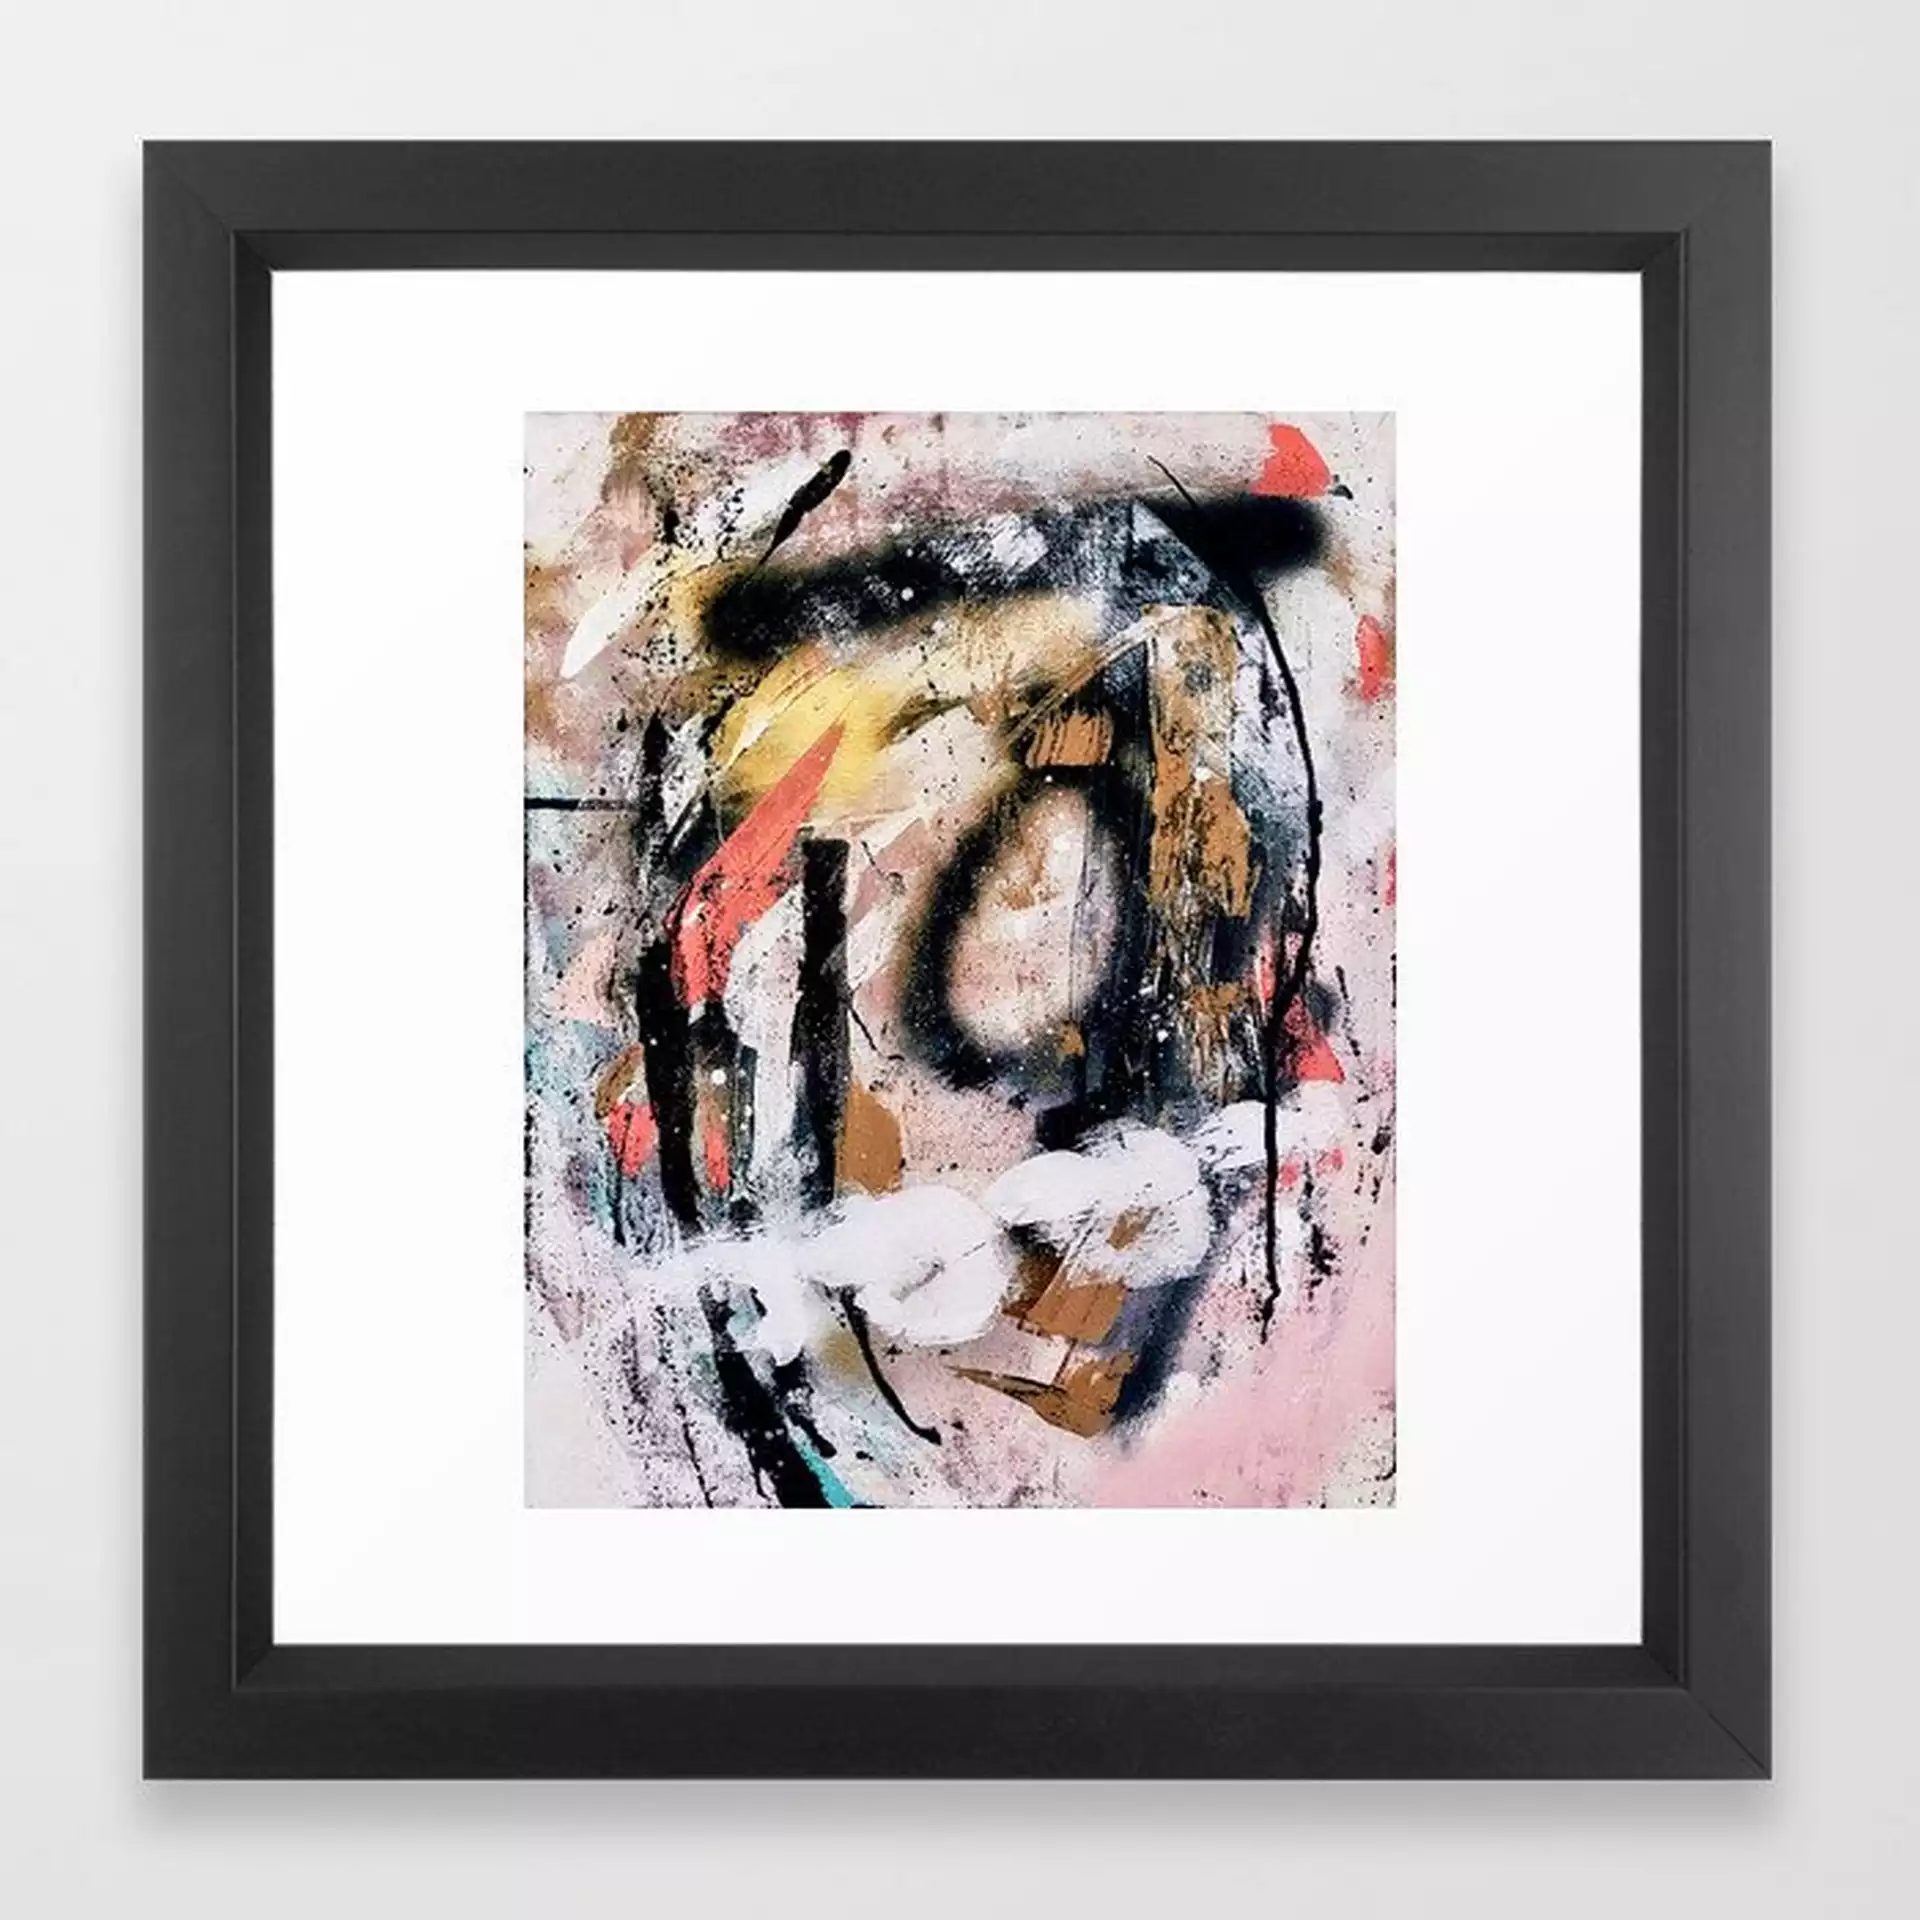 Lightning Soul: A Vibrant Colorful Abstract Acrylic, Ink, And Spray Paint In Gold, Black, Pink Framed Art Print by Alyssa Hamilton Art - Vector Black - X-Small-12x12